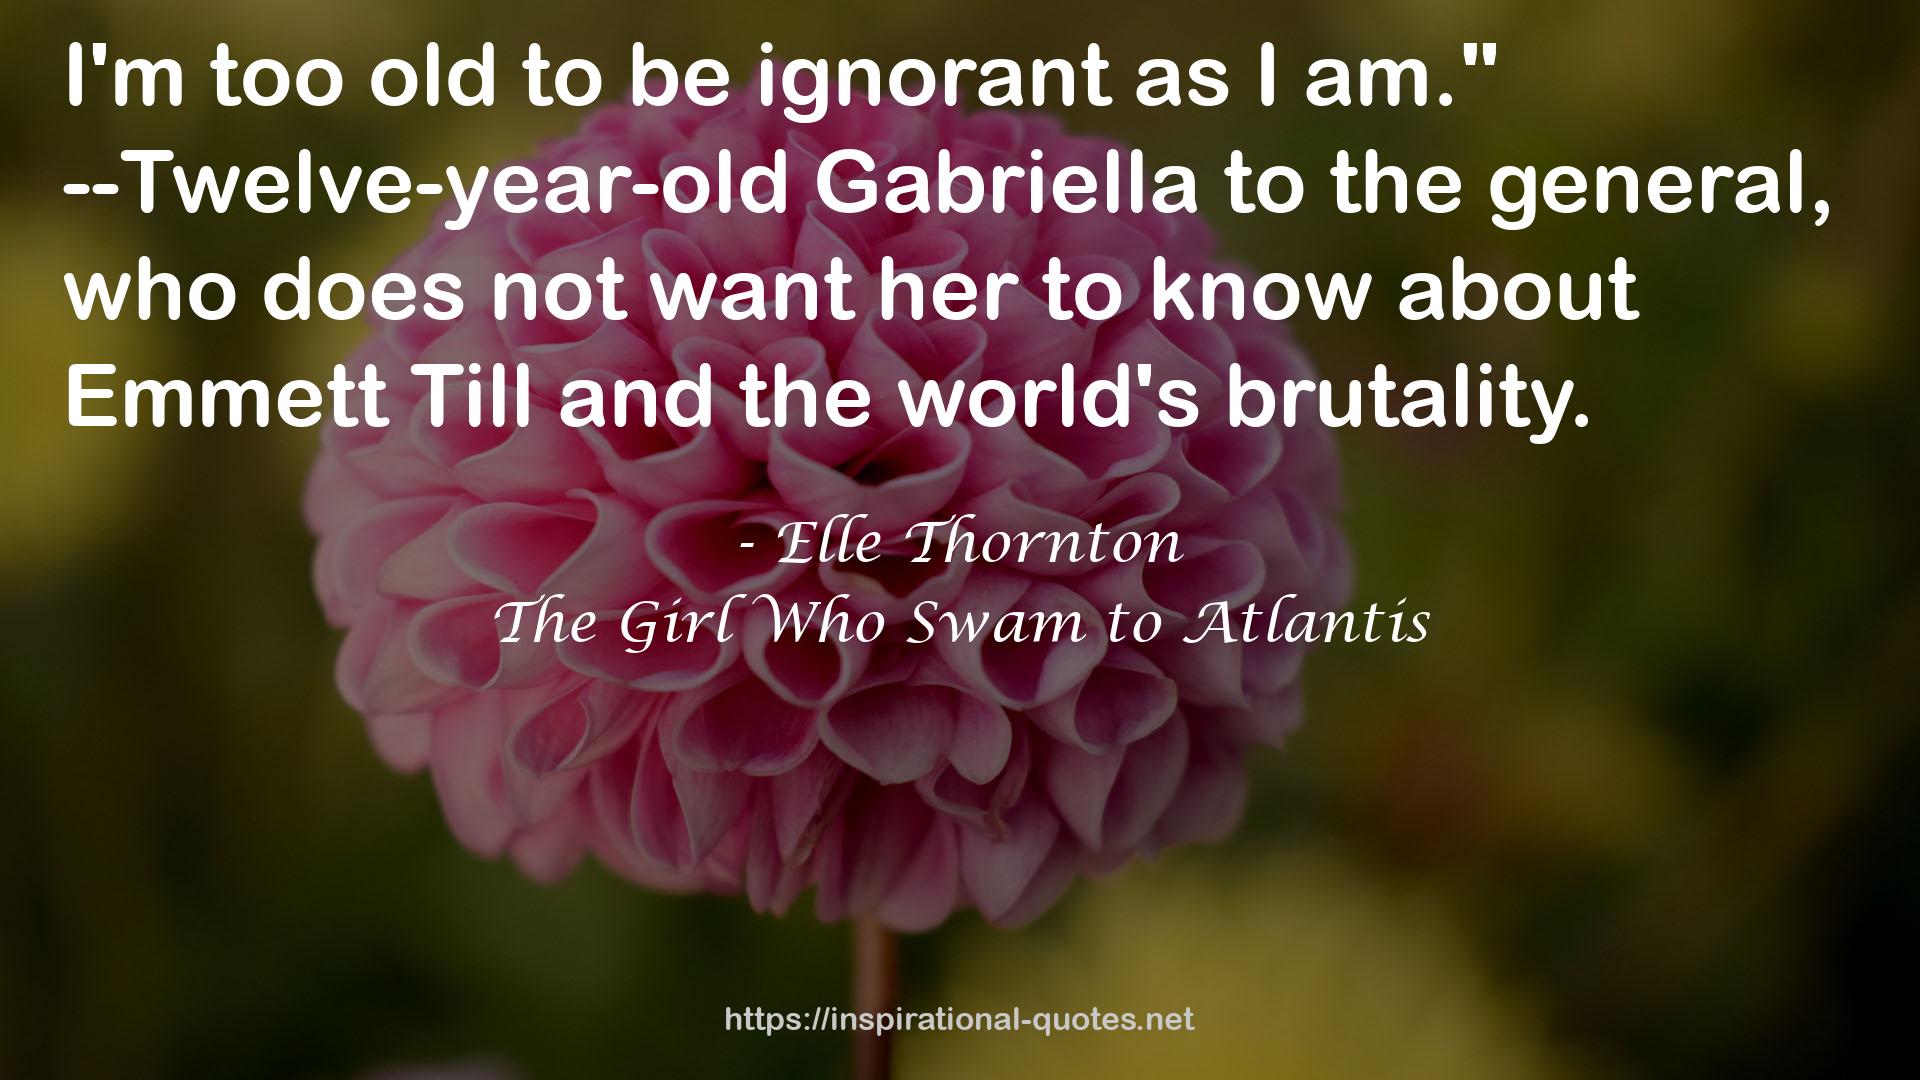 The Girl Who Swam to Atlantis QUOTES